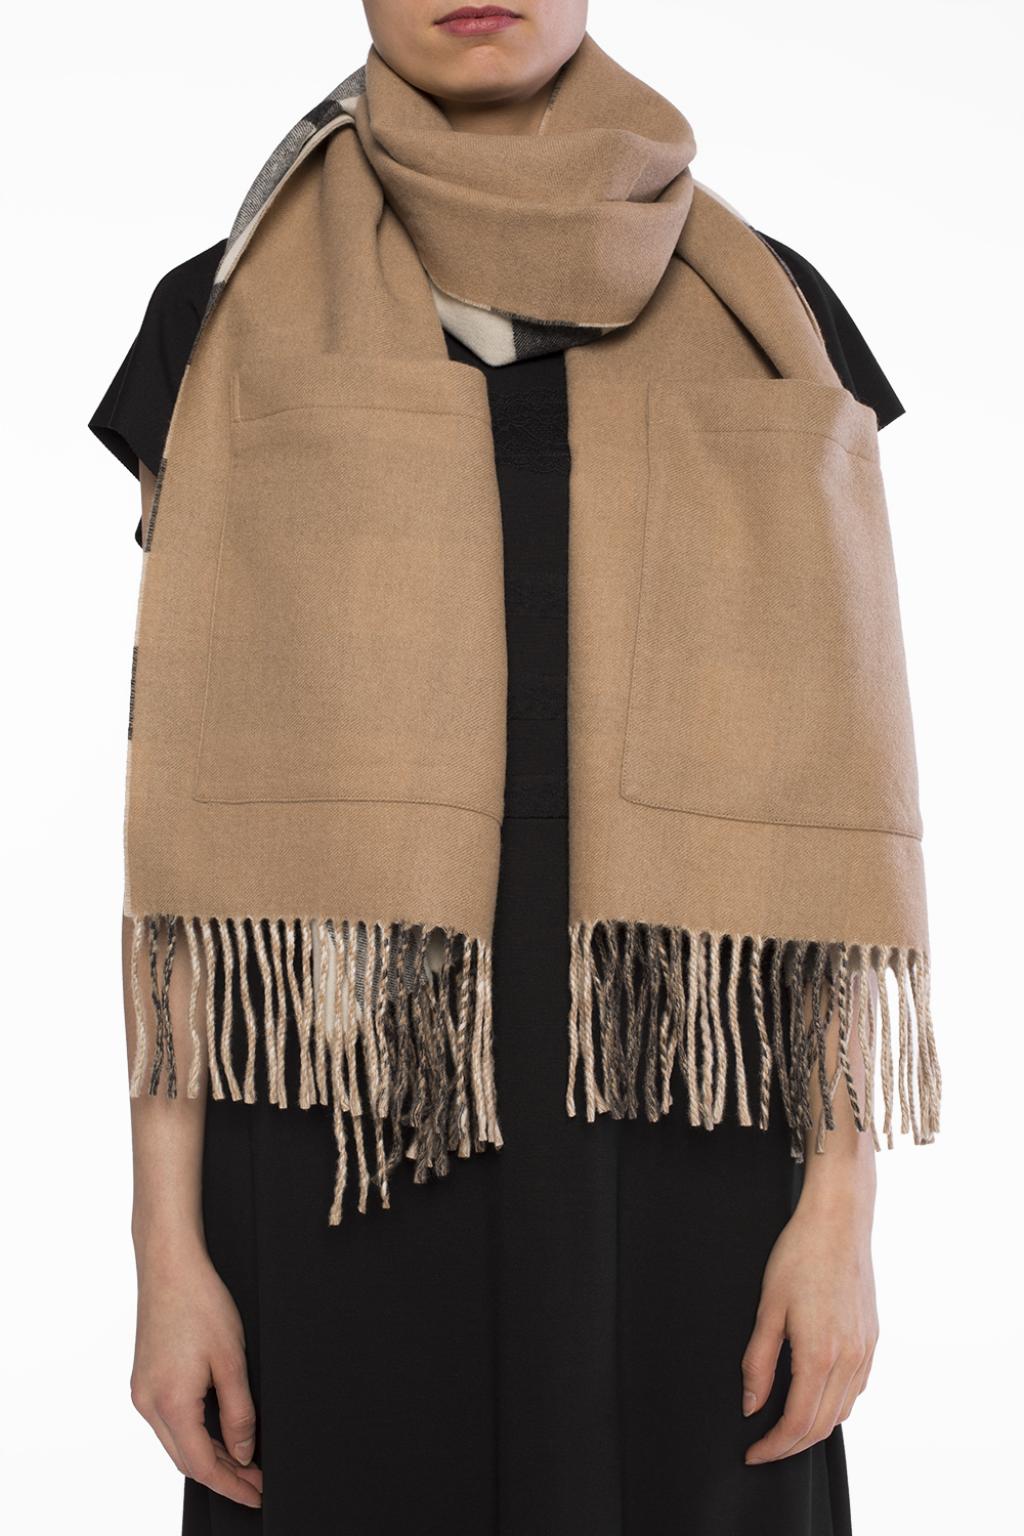 burberry scarf with pockets